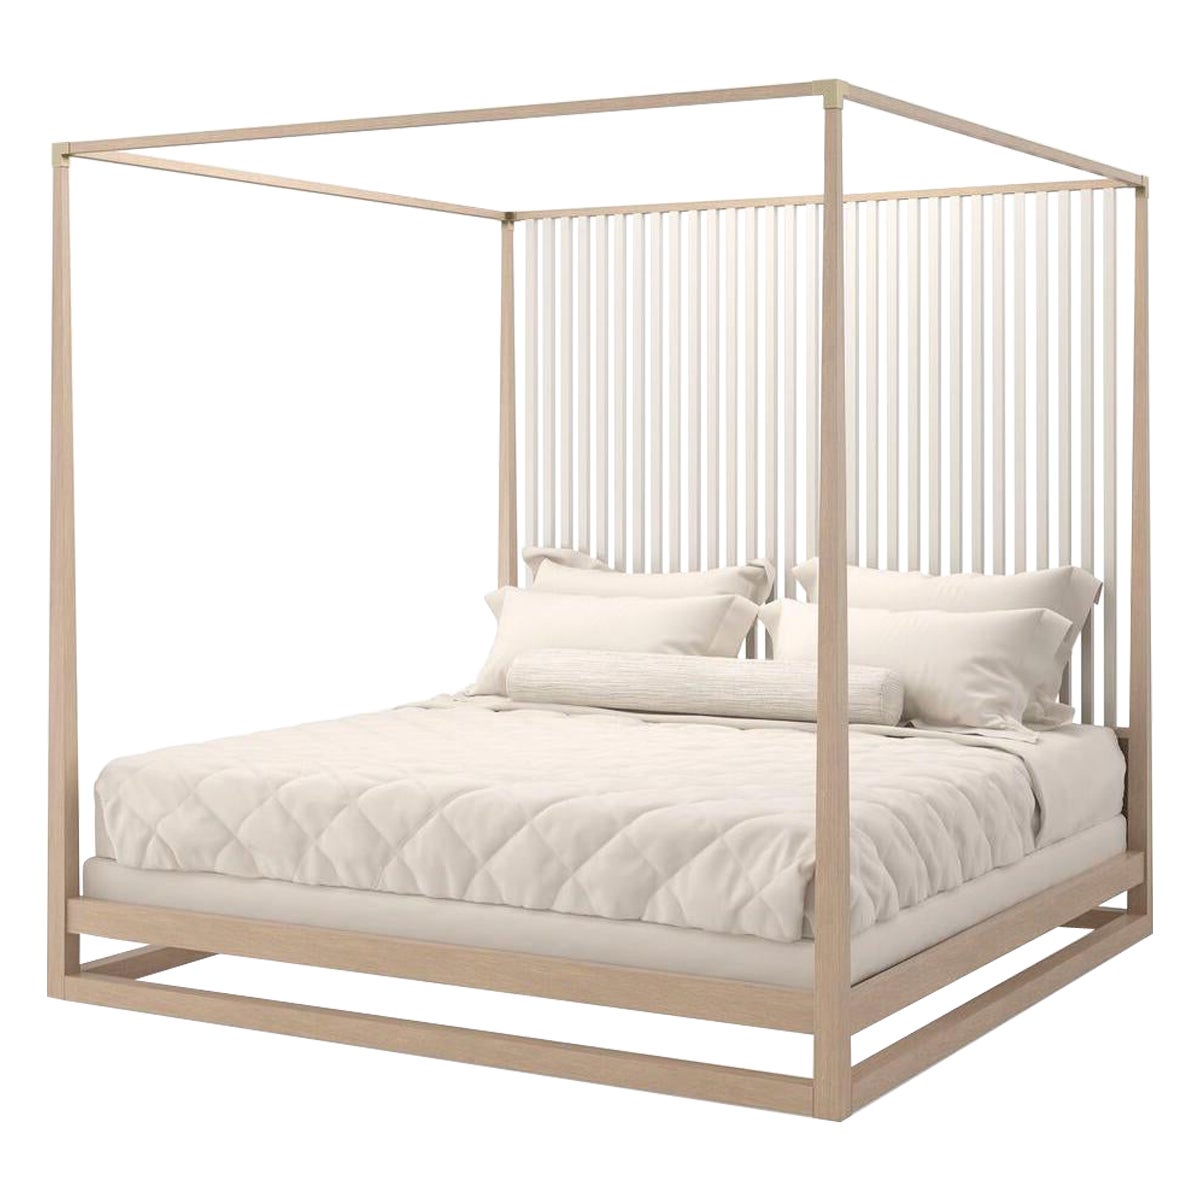 Are canopy beds still made?